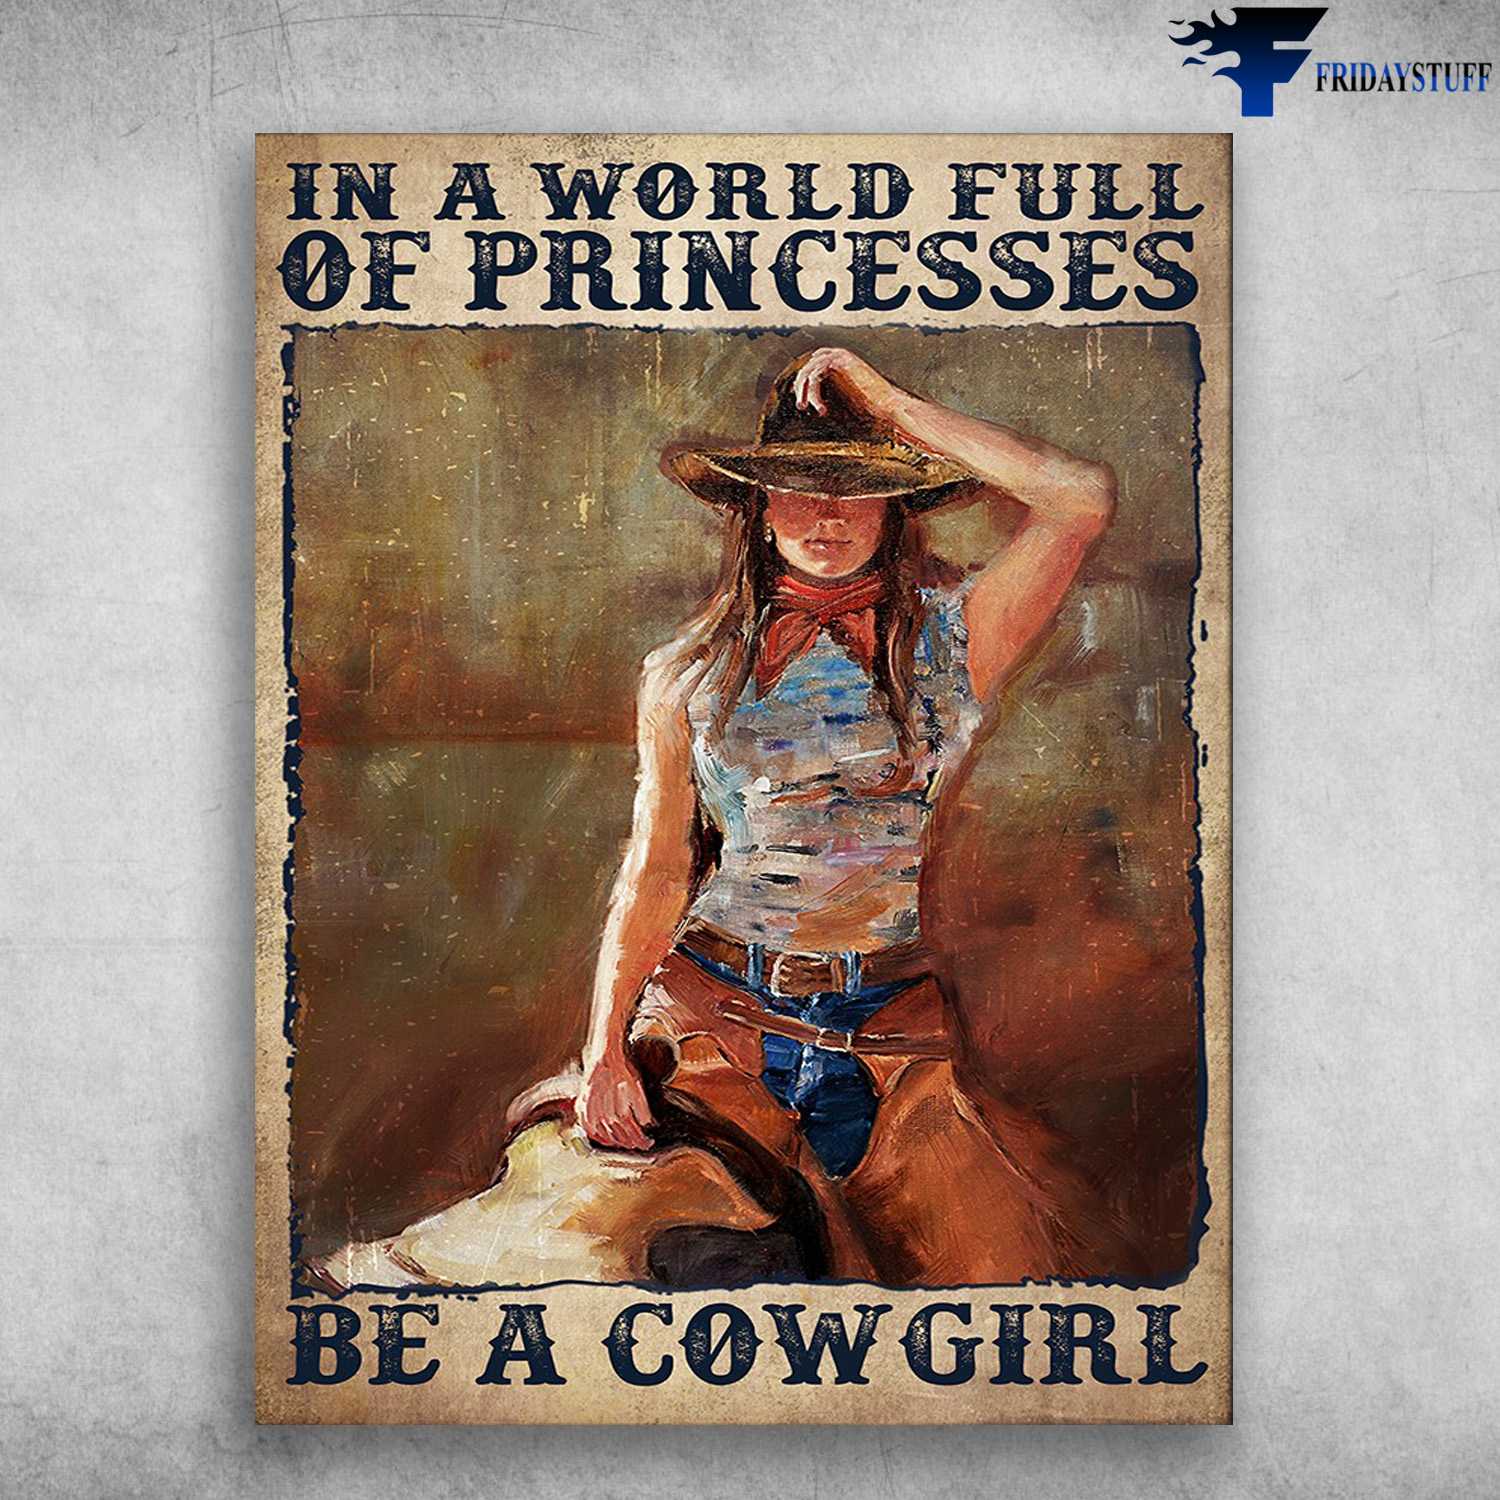 Cowboy Style, Cowgirl Poster - In A World Full Of Princesses, Be A Cowgirl